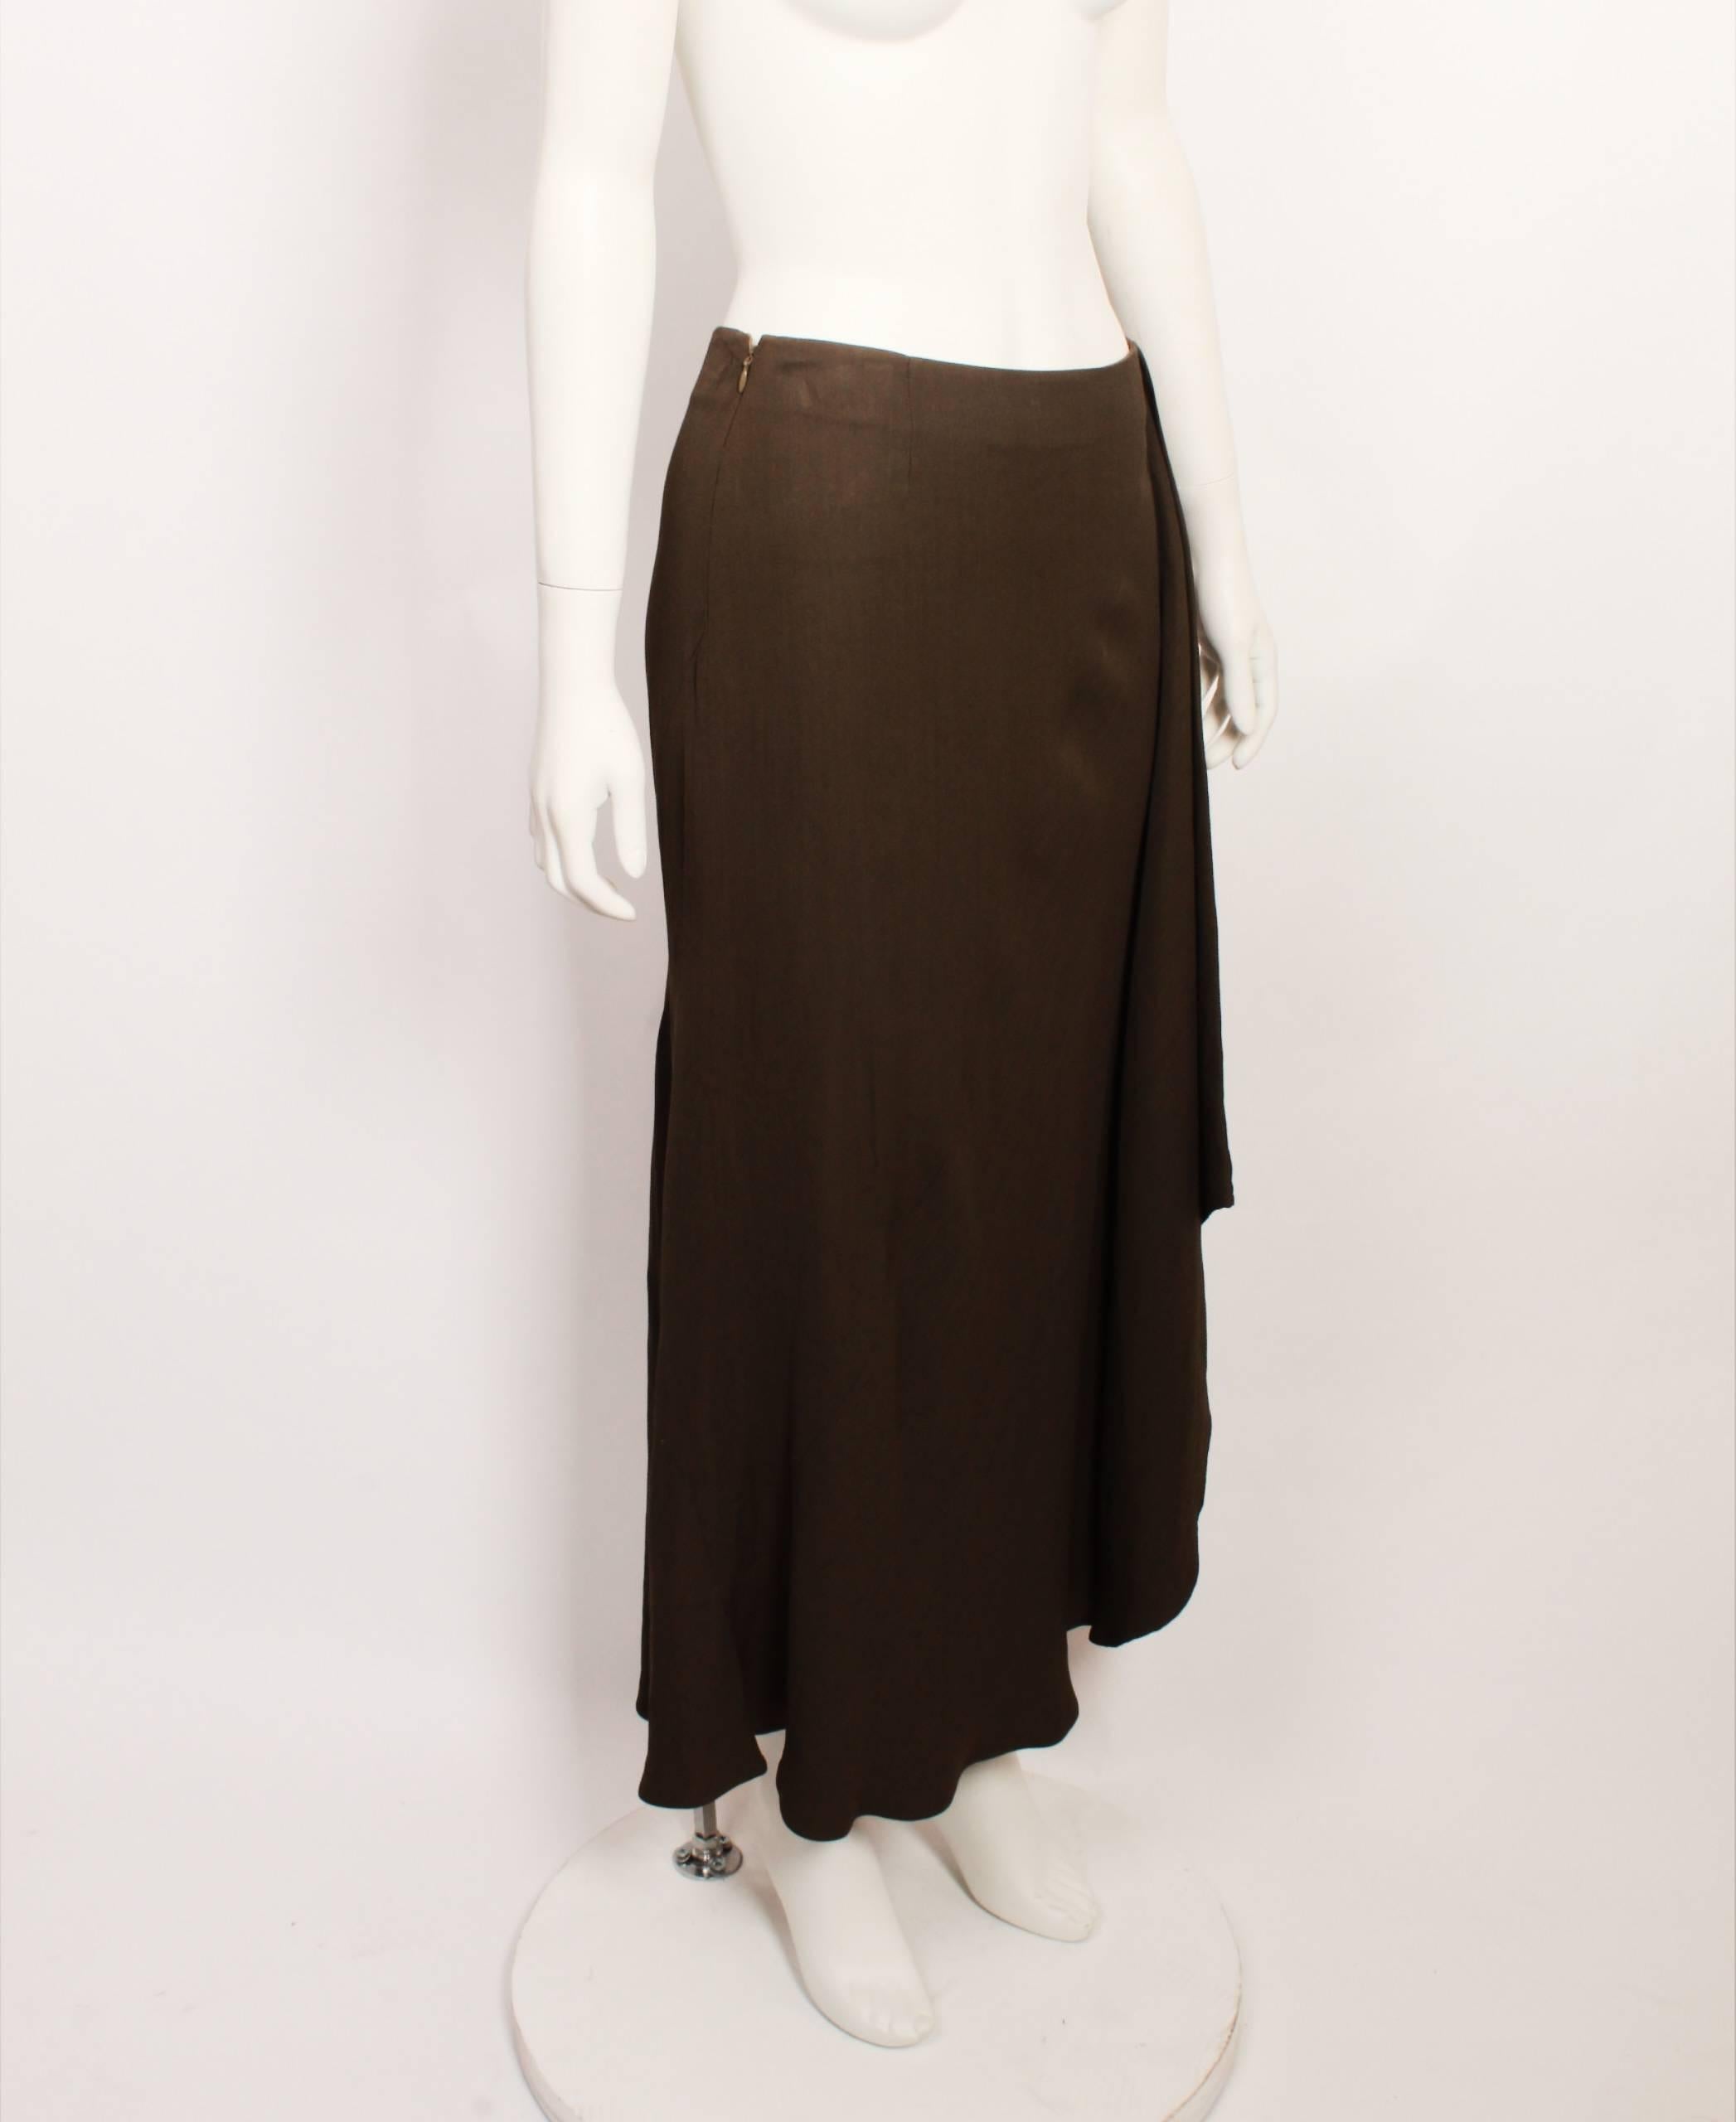 Incredible vintage KENZO Paris khaki  skirt. Asymmetrical on one side with hidden zipper up the side with hook-and-eye closure. In great condition. Made in France. Marked Size EU 38